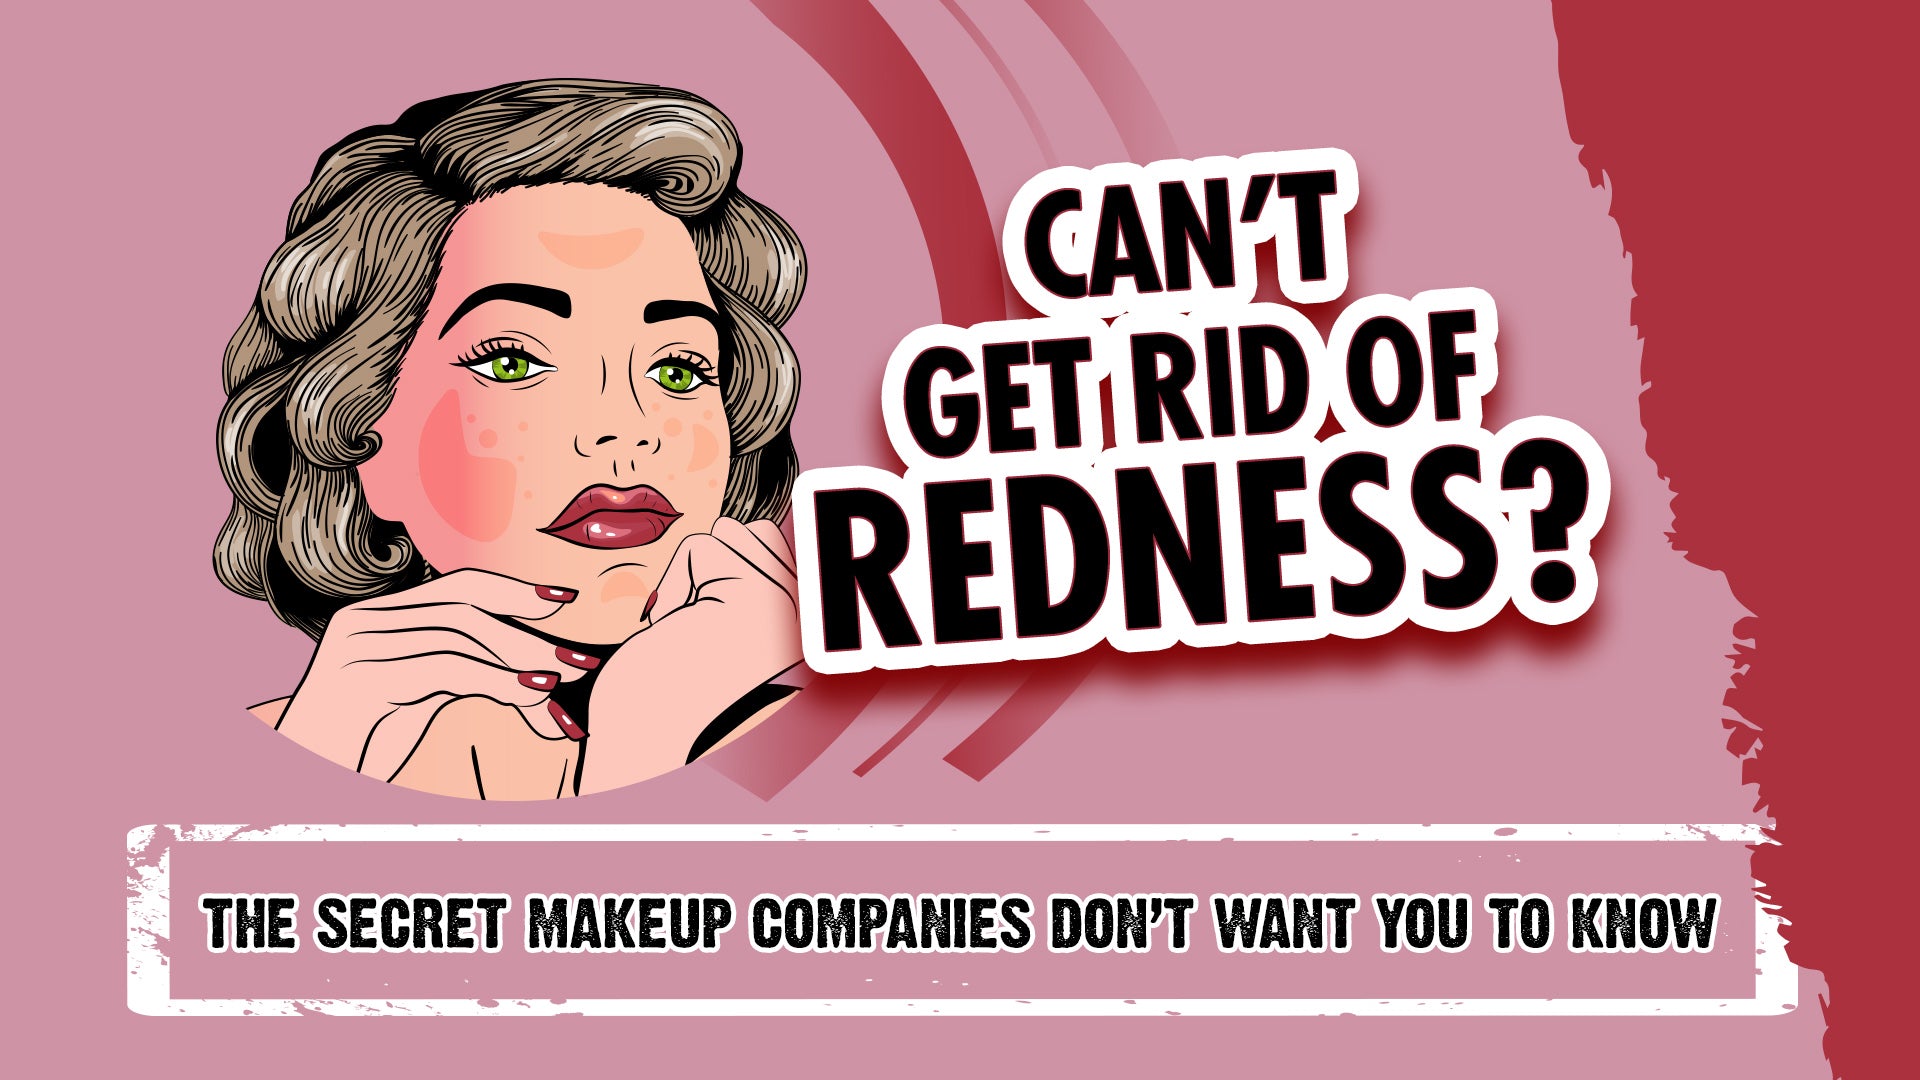 The secret makeup companies don’t want you to know about redness!